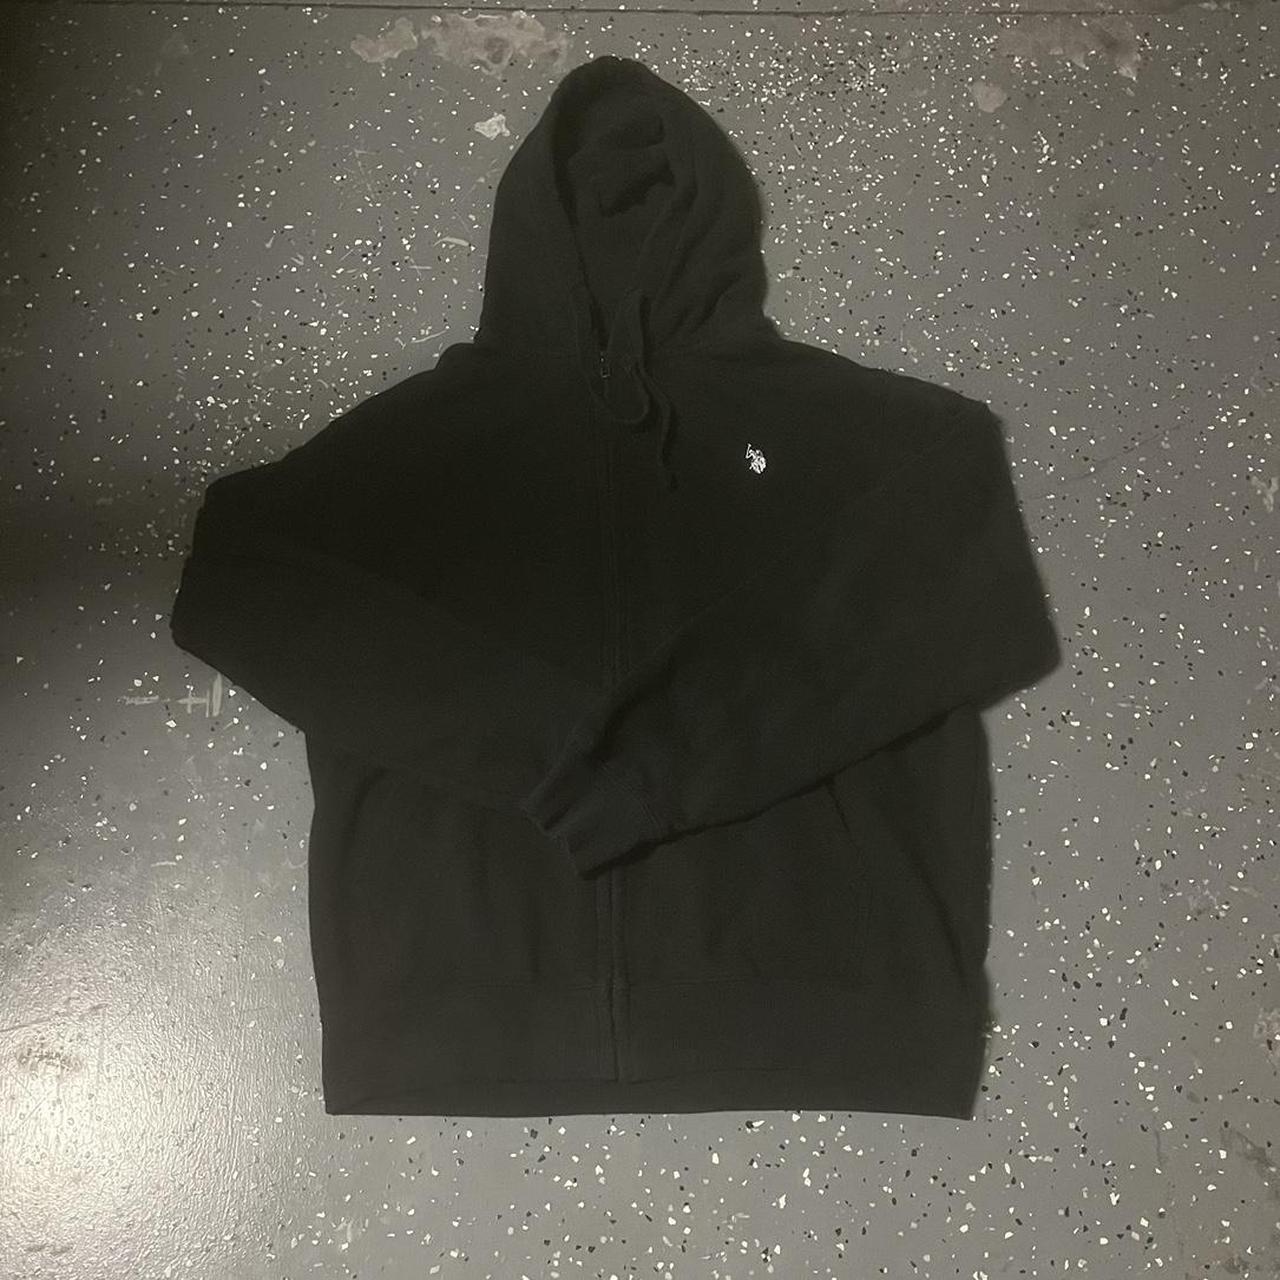 Black polo jacket, cleaned, no flaws. - Depop